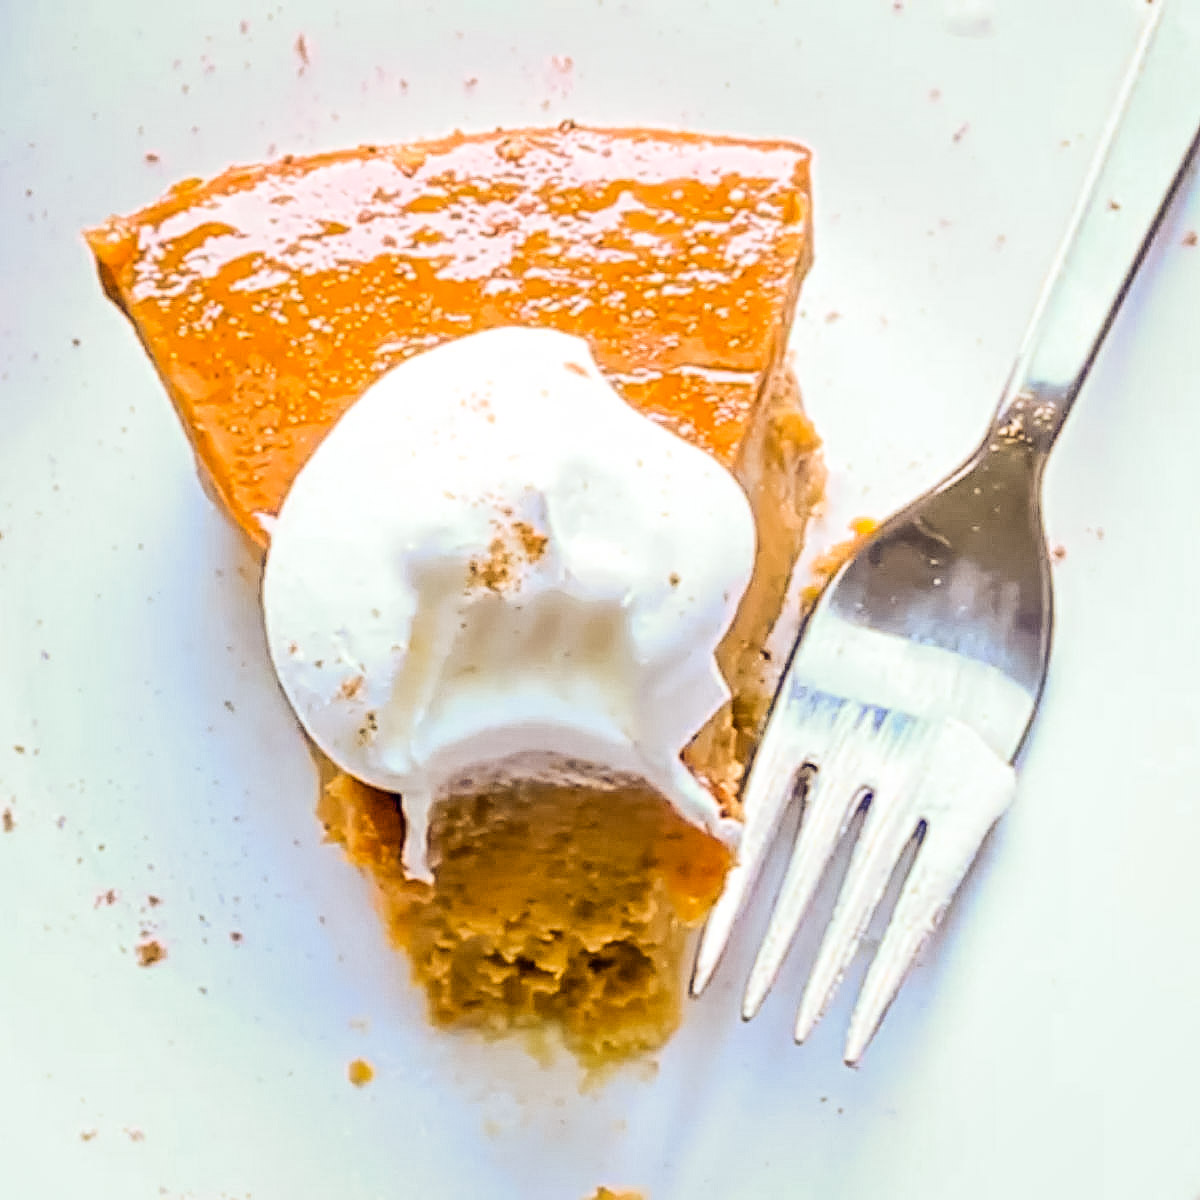 Slice of pumpkin pie with coconut whipped cream and fork